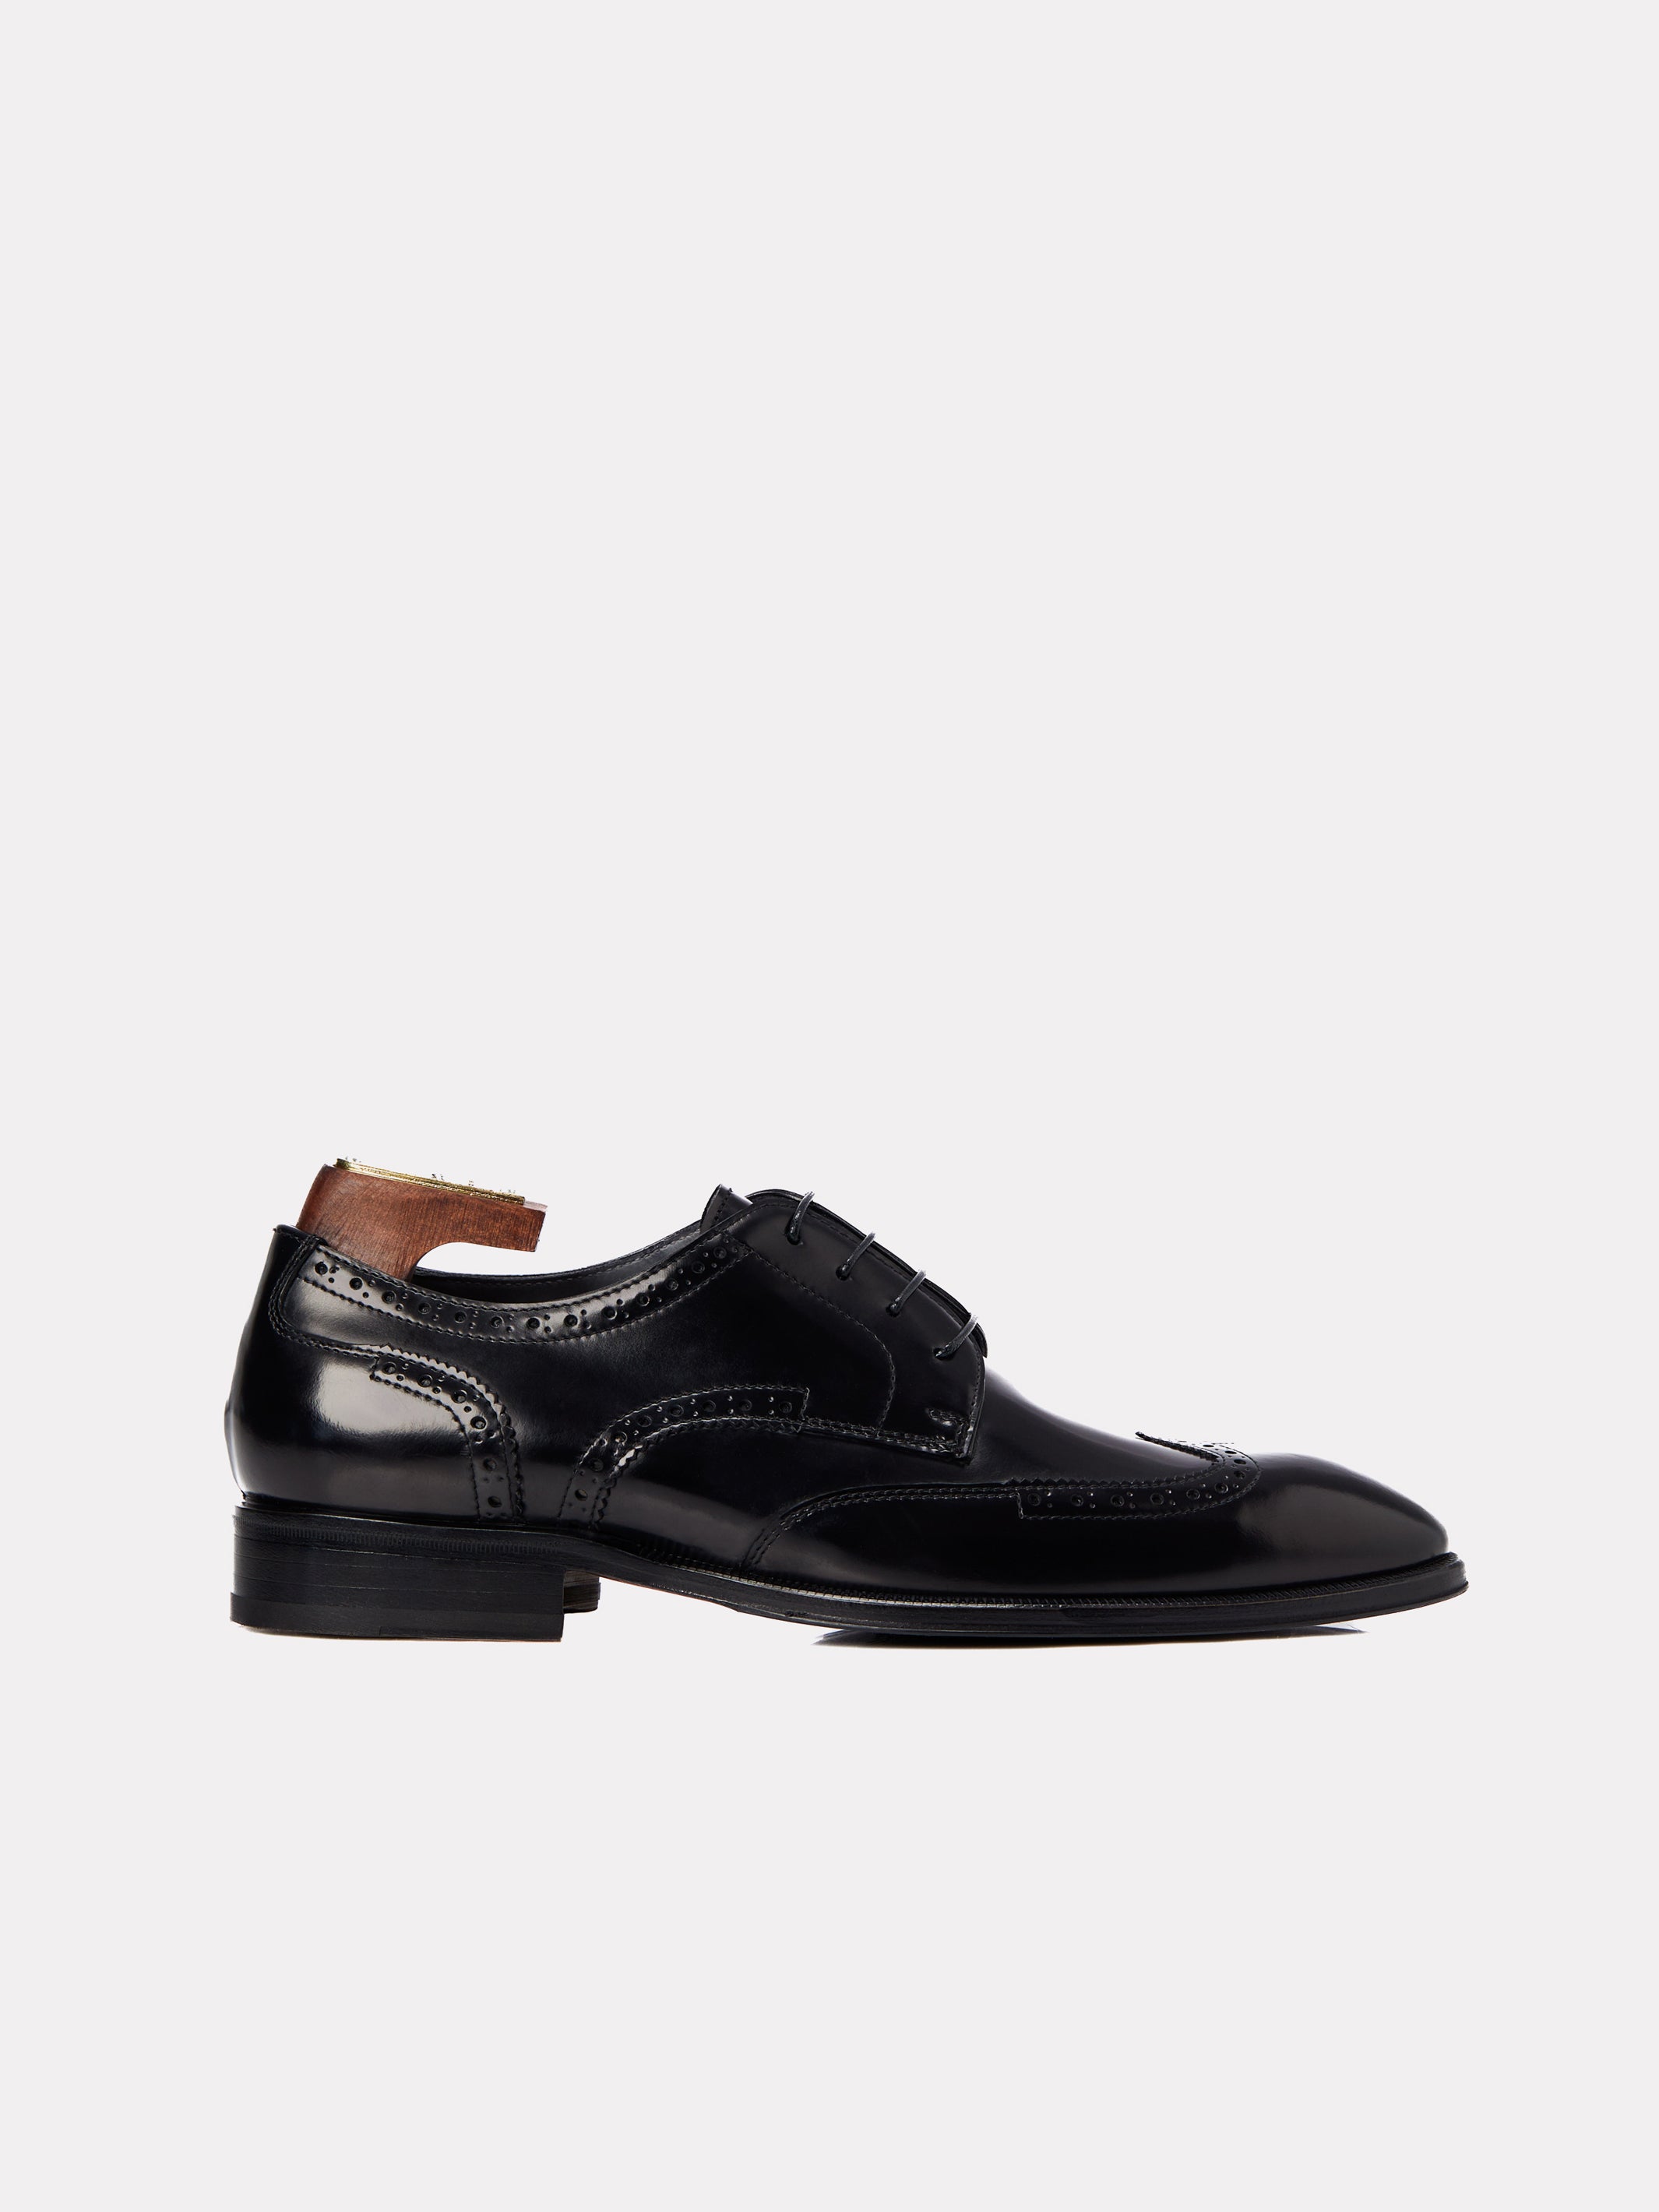 Derby shoes with brogue details